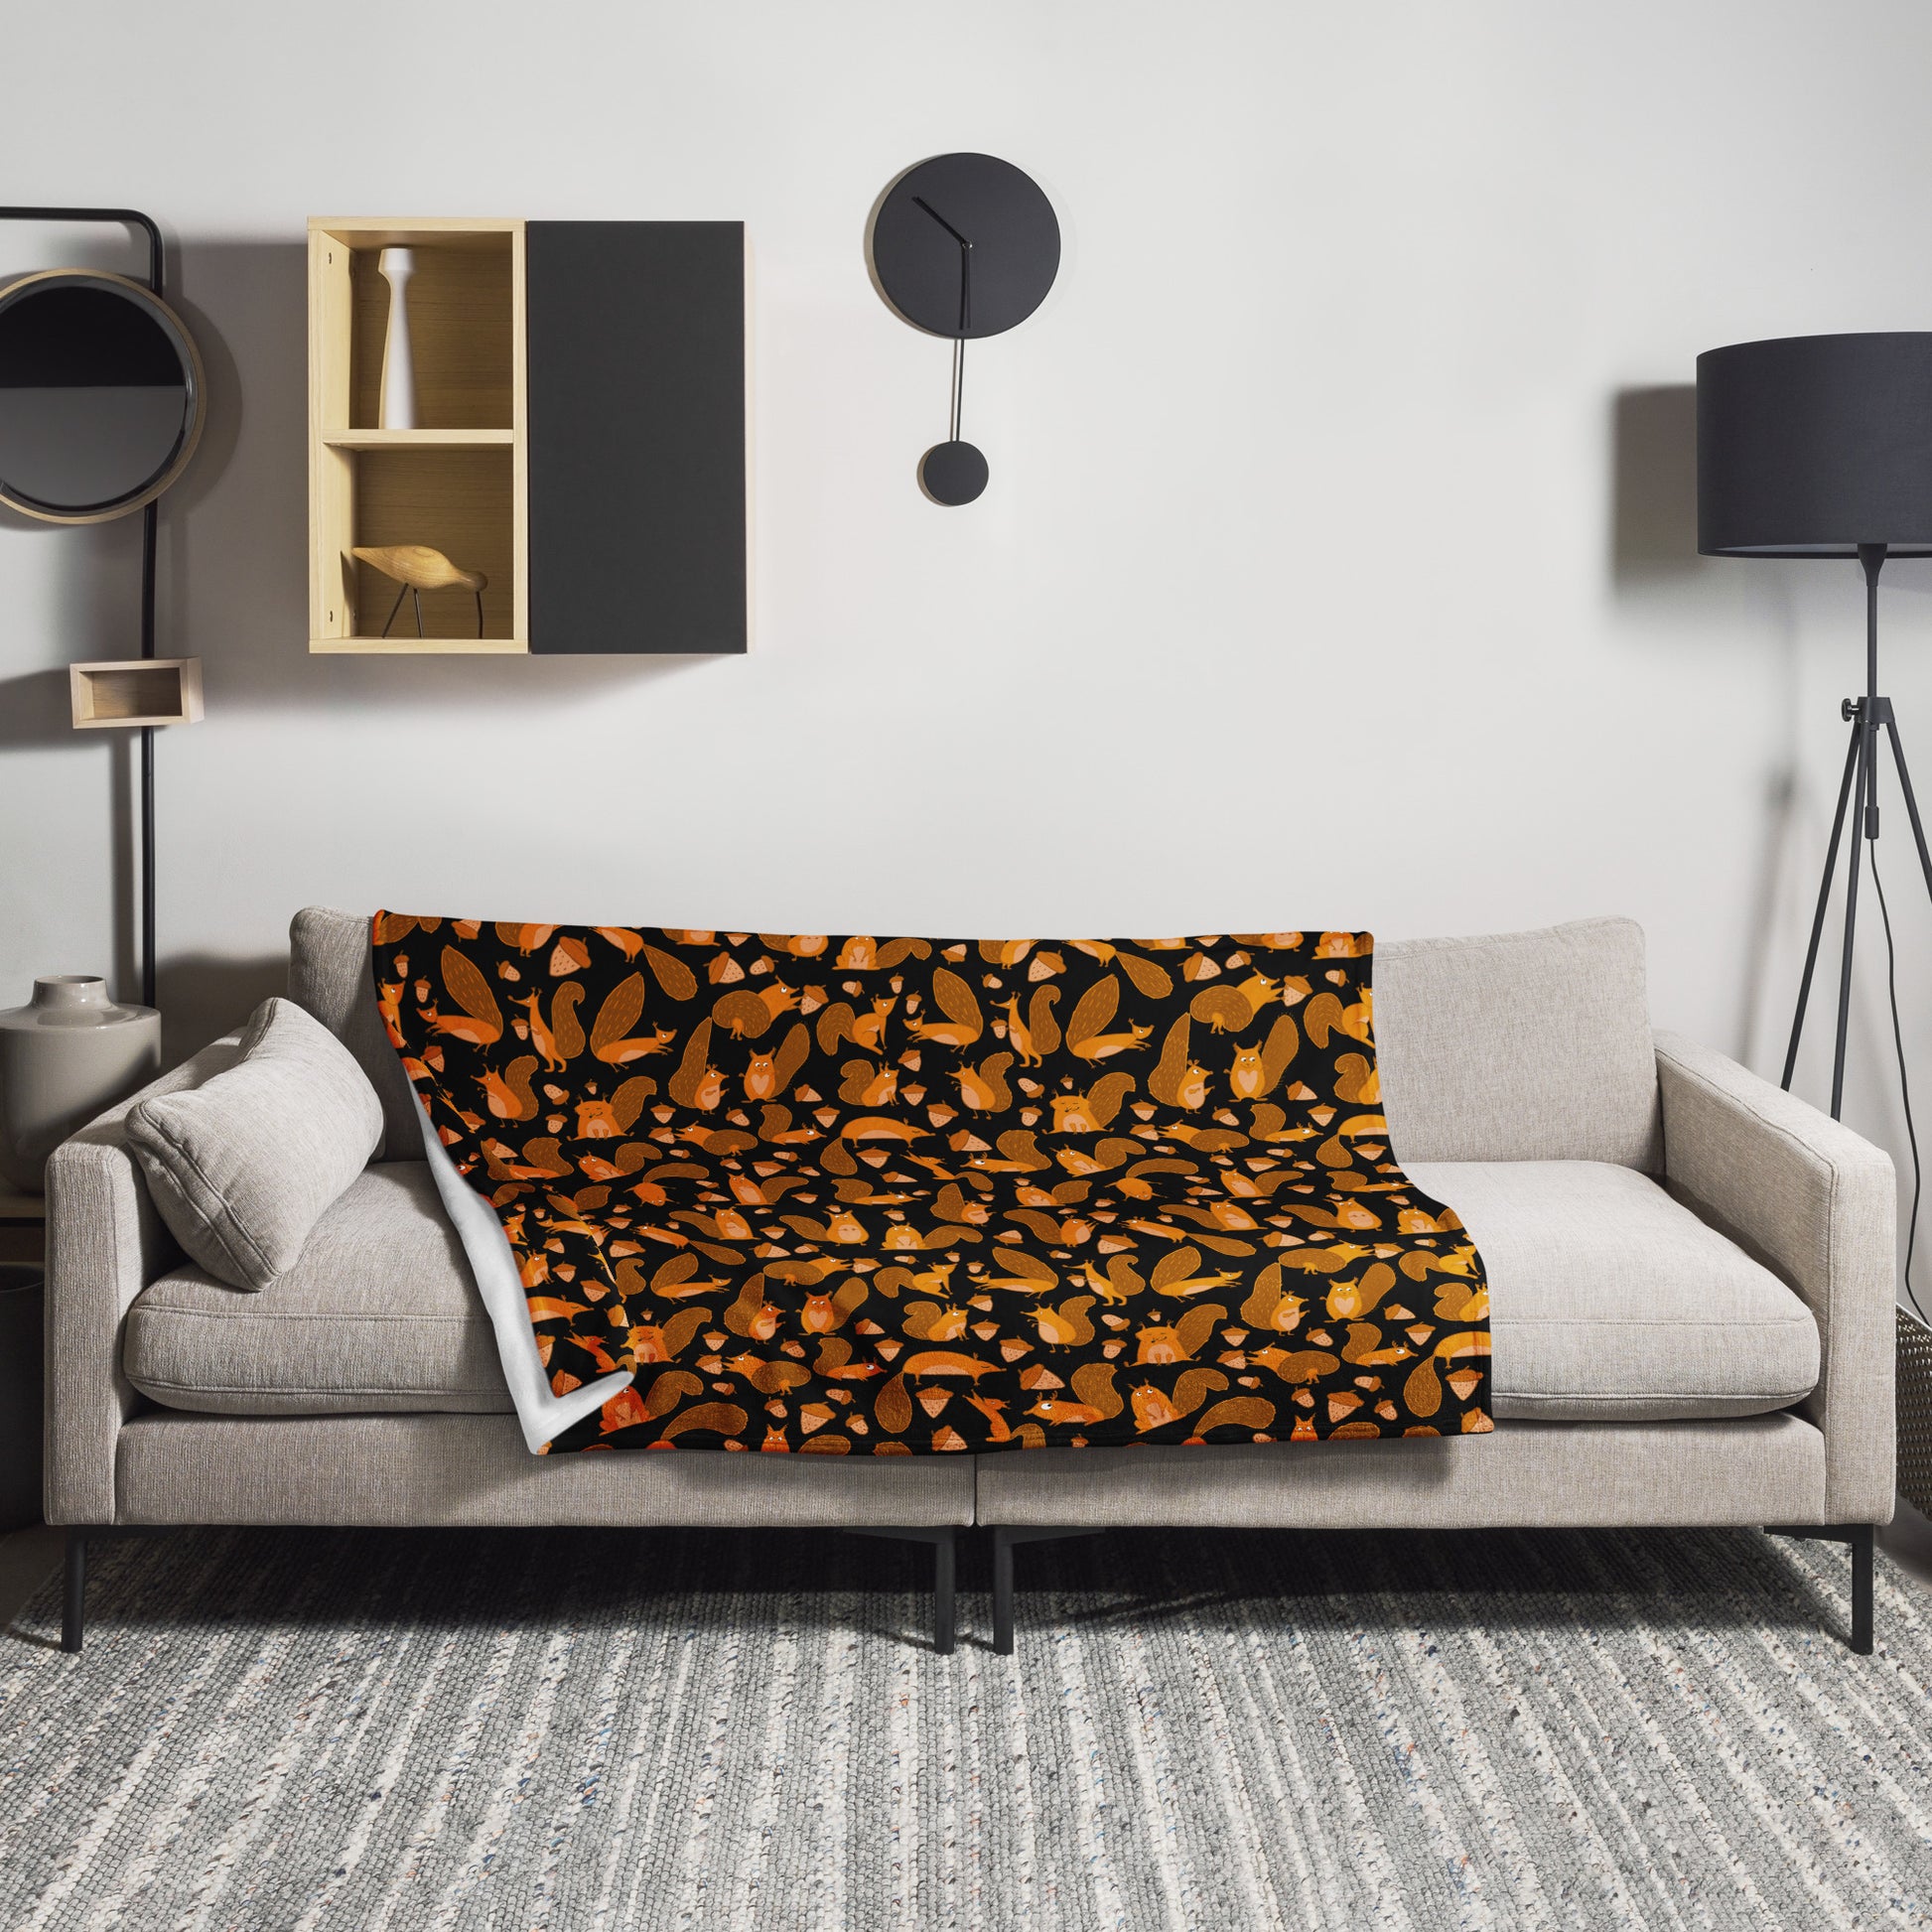 Design interior with Throw blanket black color with funny orange squirrels and nuts on sofa